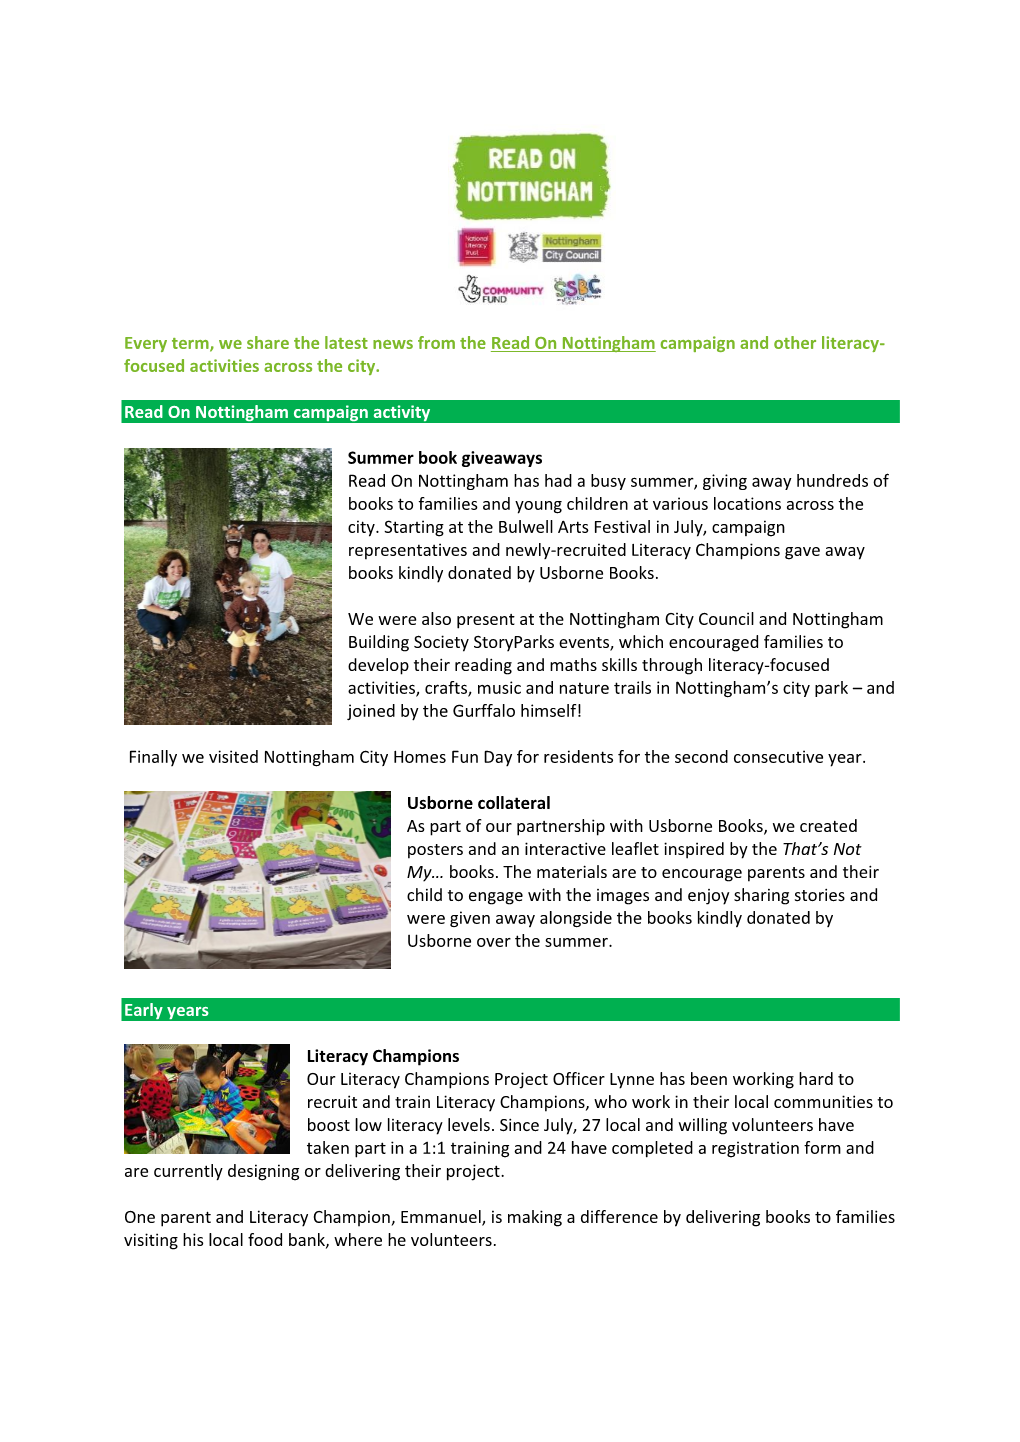 Every Term, We Share the Latest News from the Read on Nottingham Campaign and Other Literacy- Focused Activities Across the City